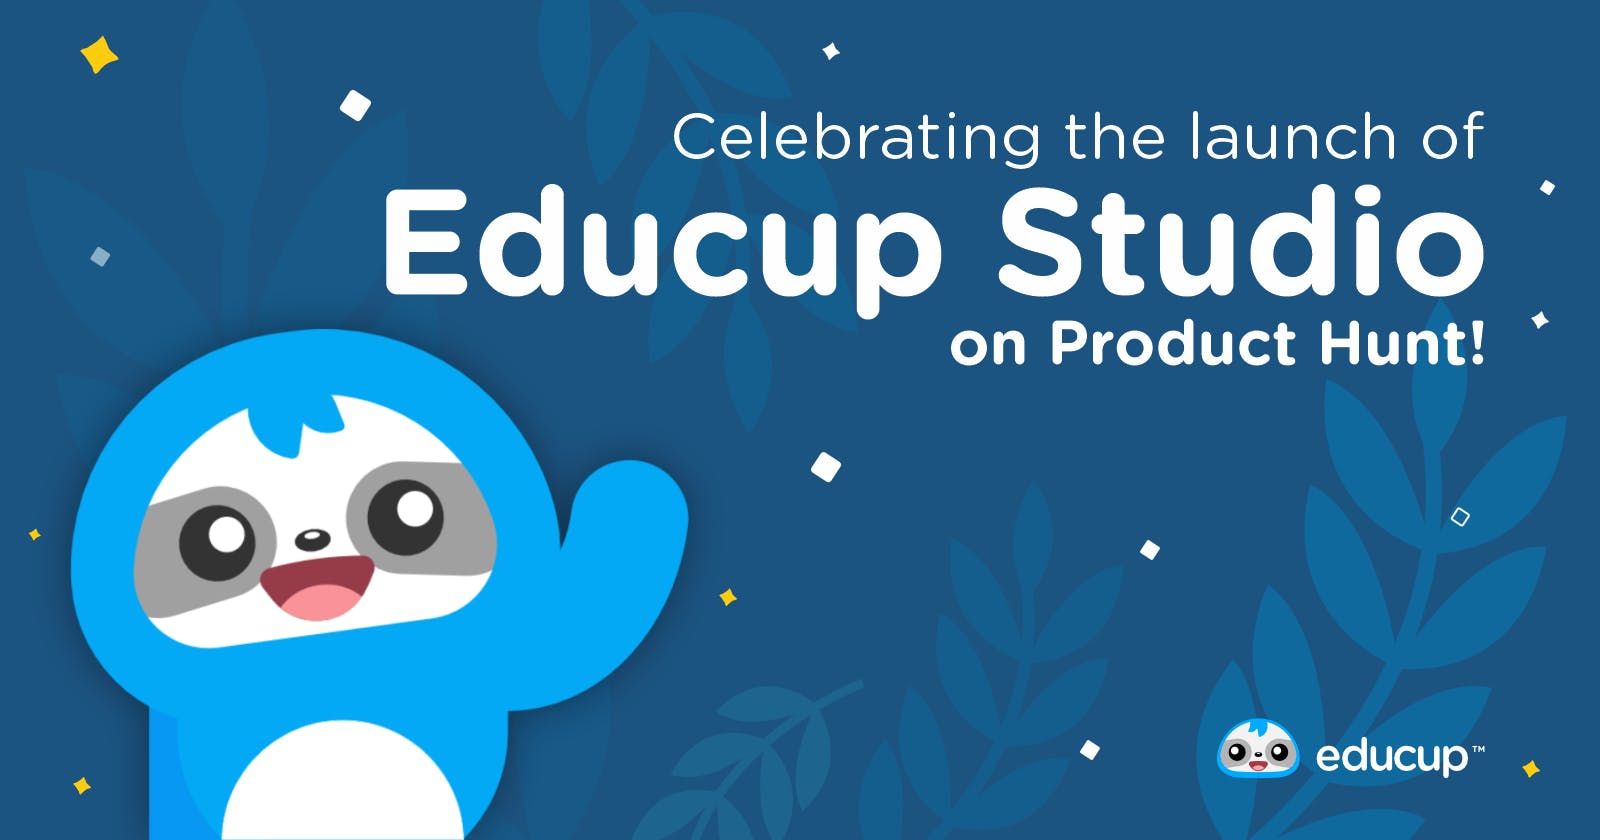 Empowering Education: Educup Studio Ranks Among Top Products on Product Hunt!